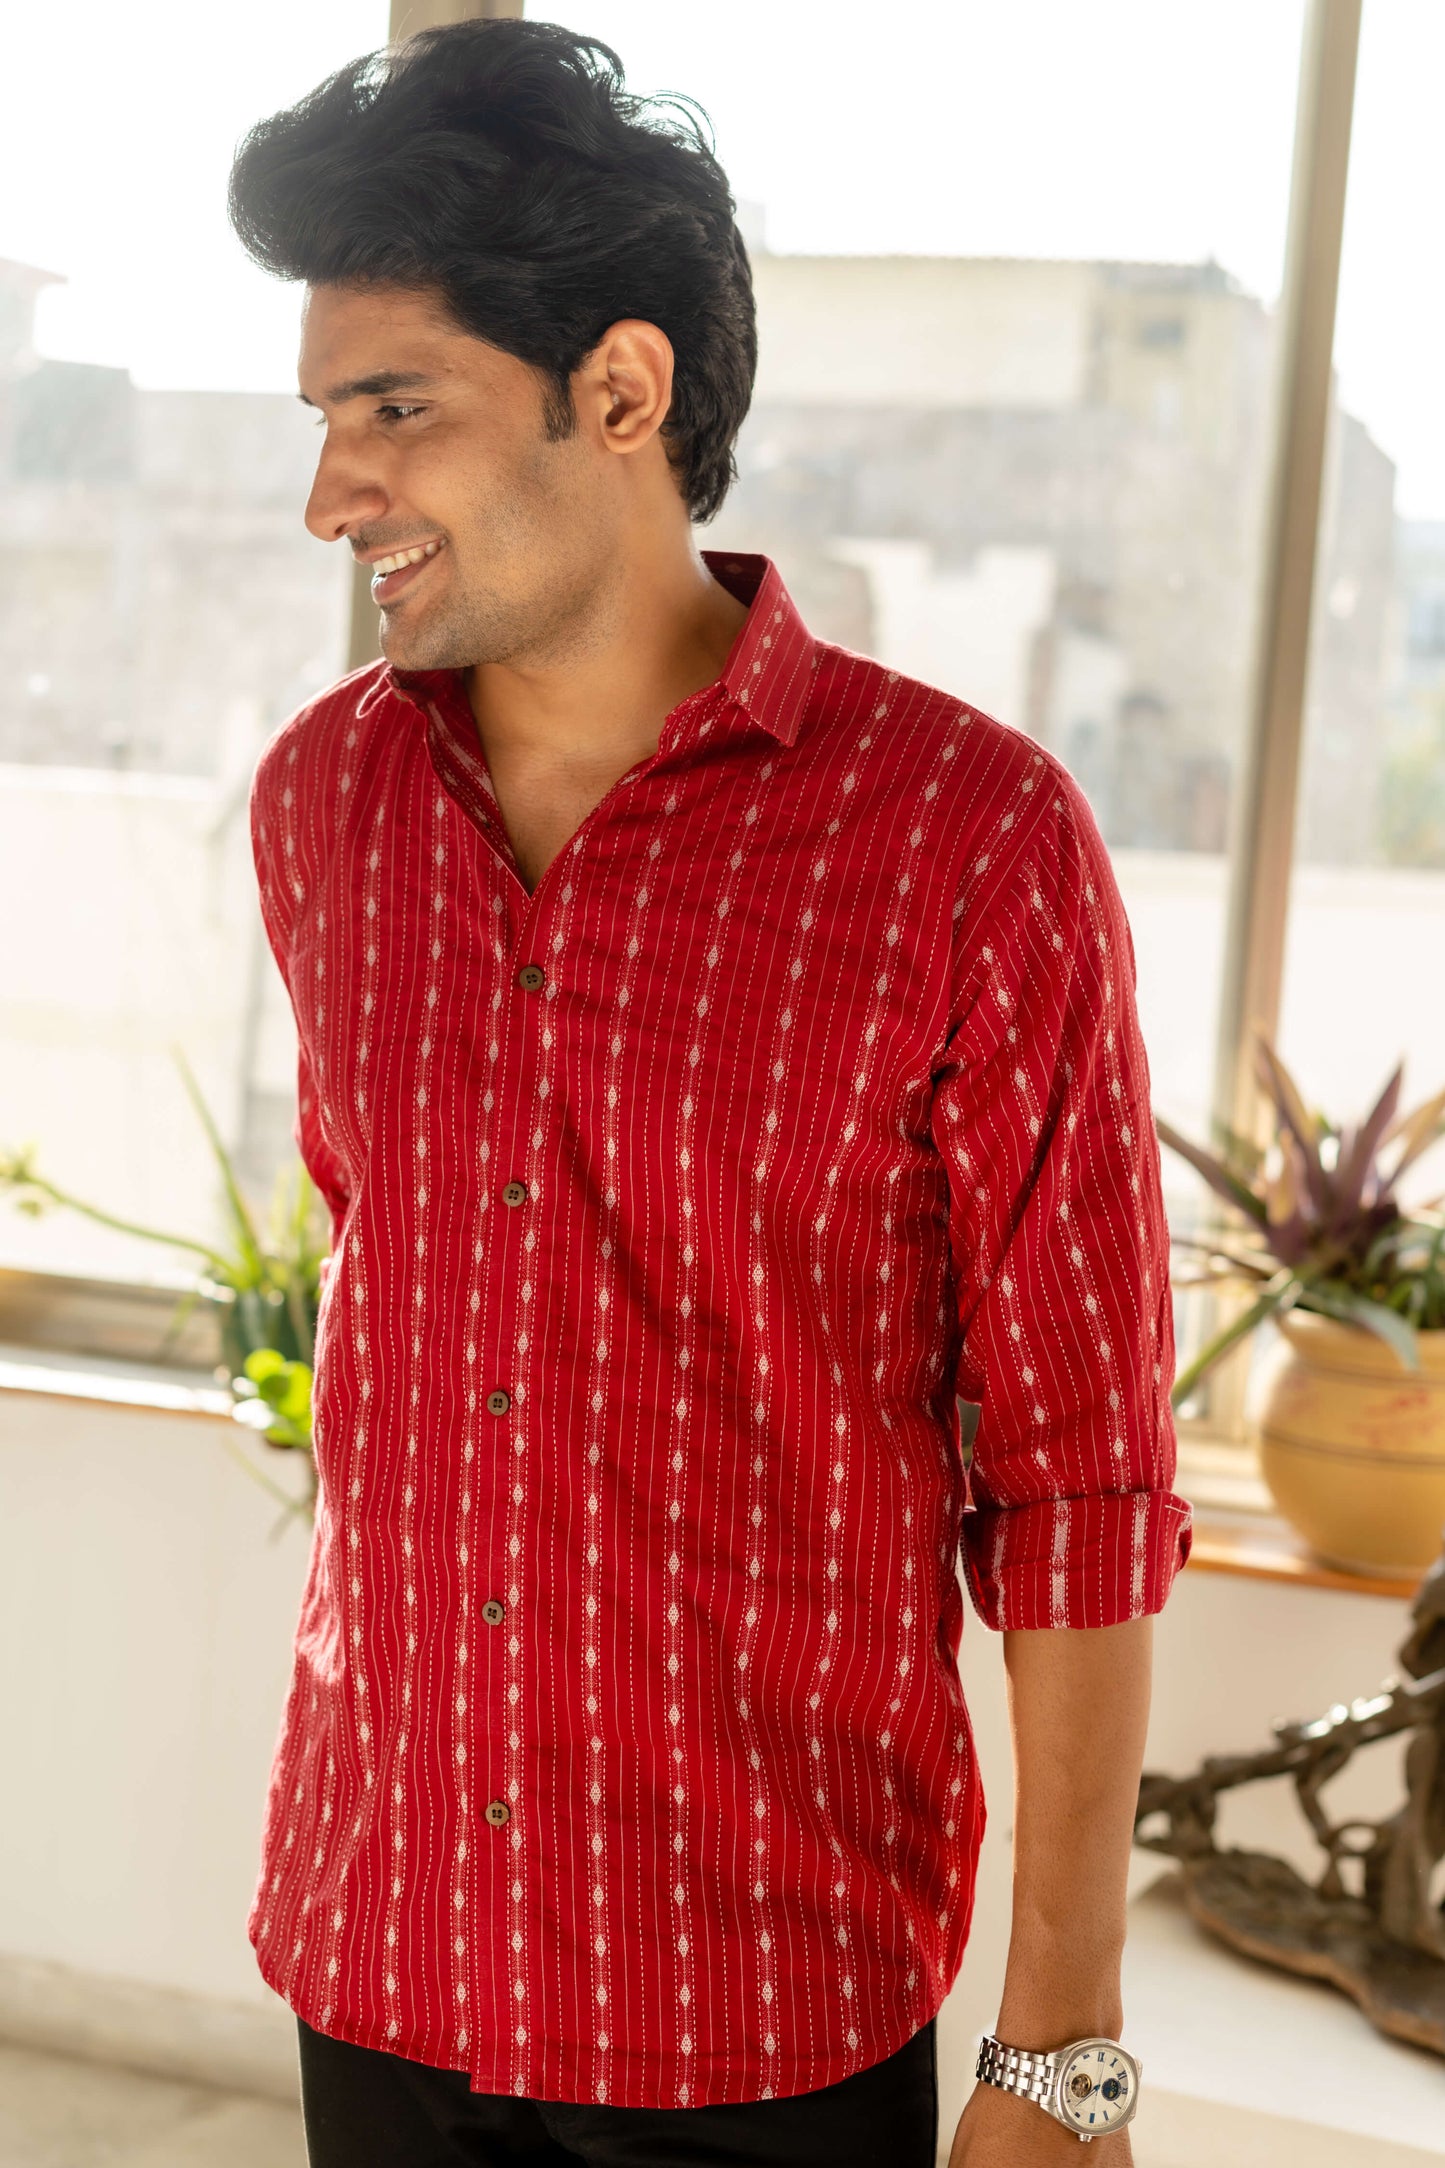 The Maroon Shirt With Striped Self Work